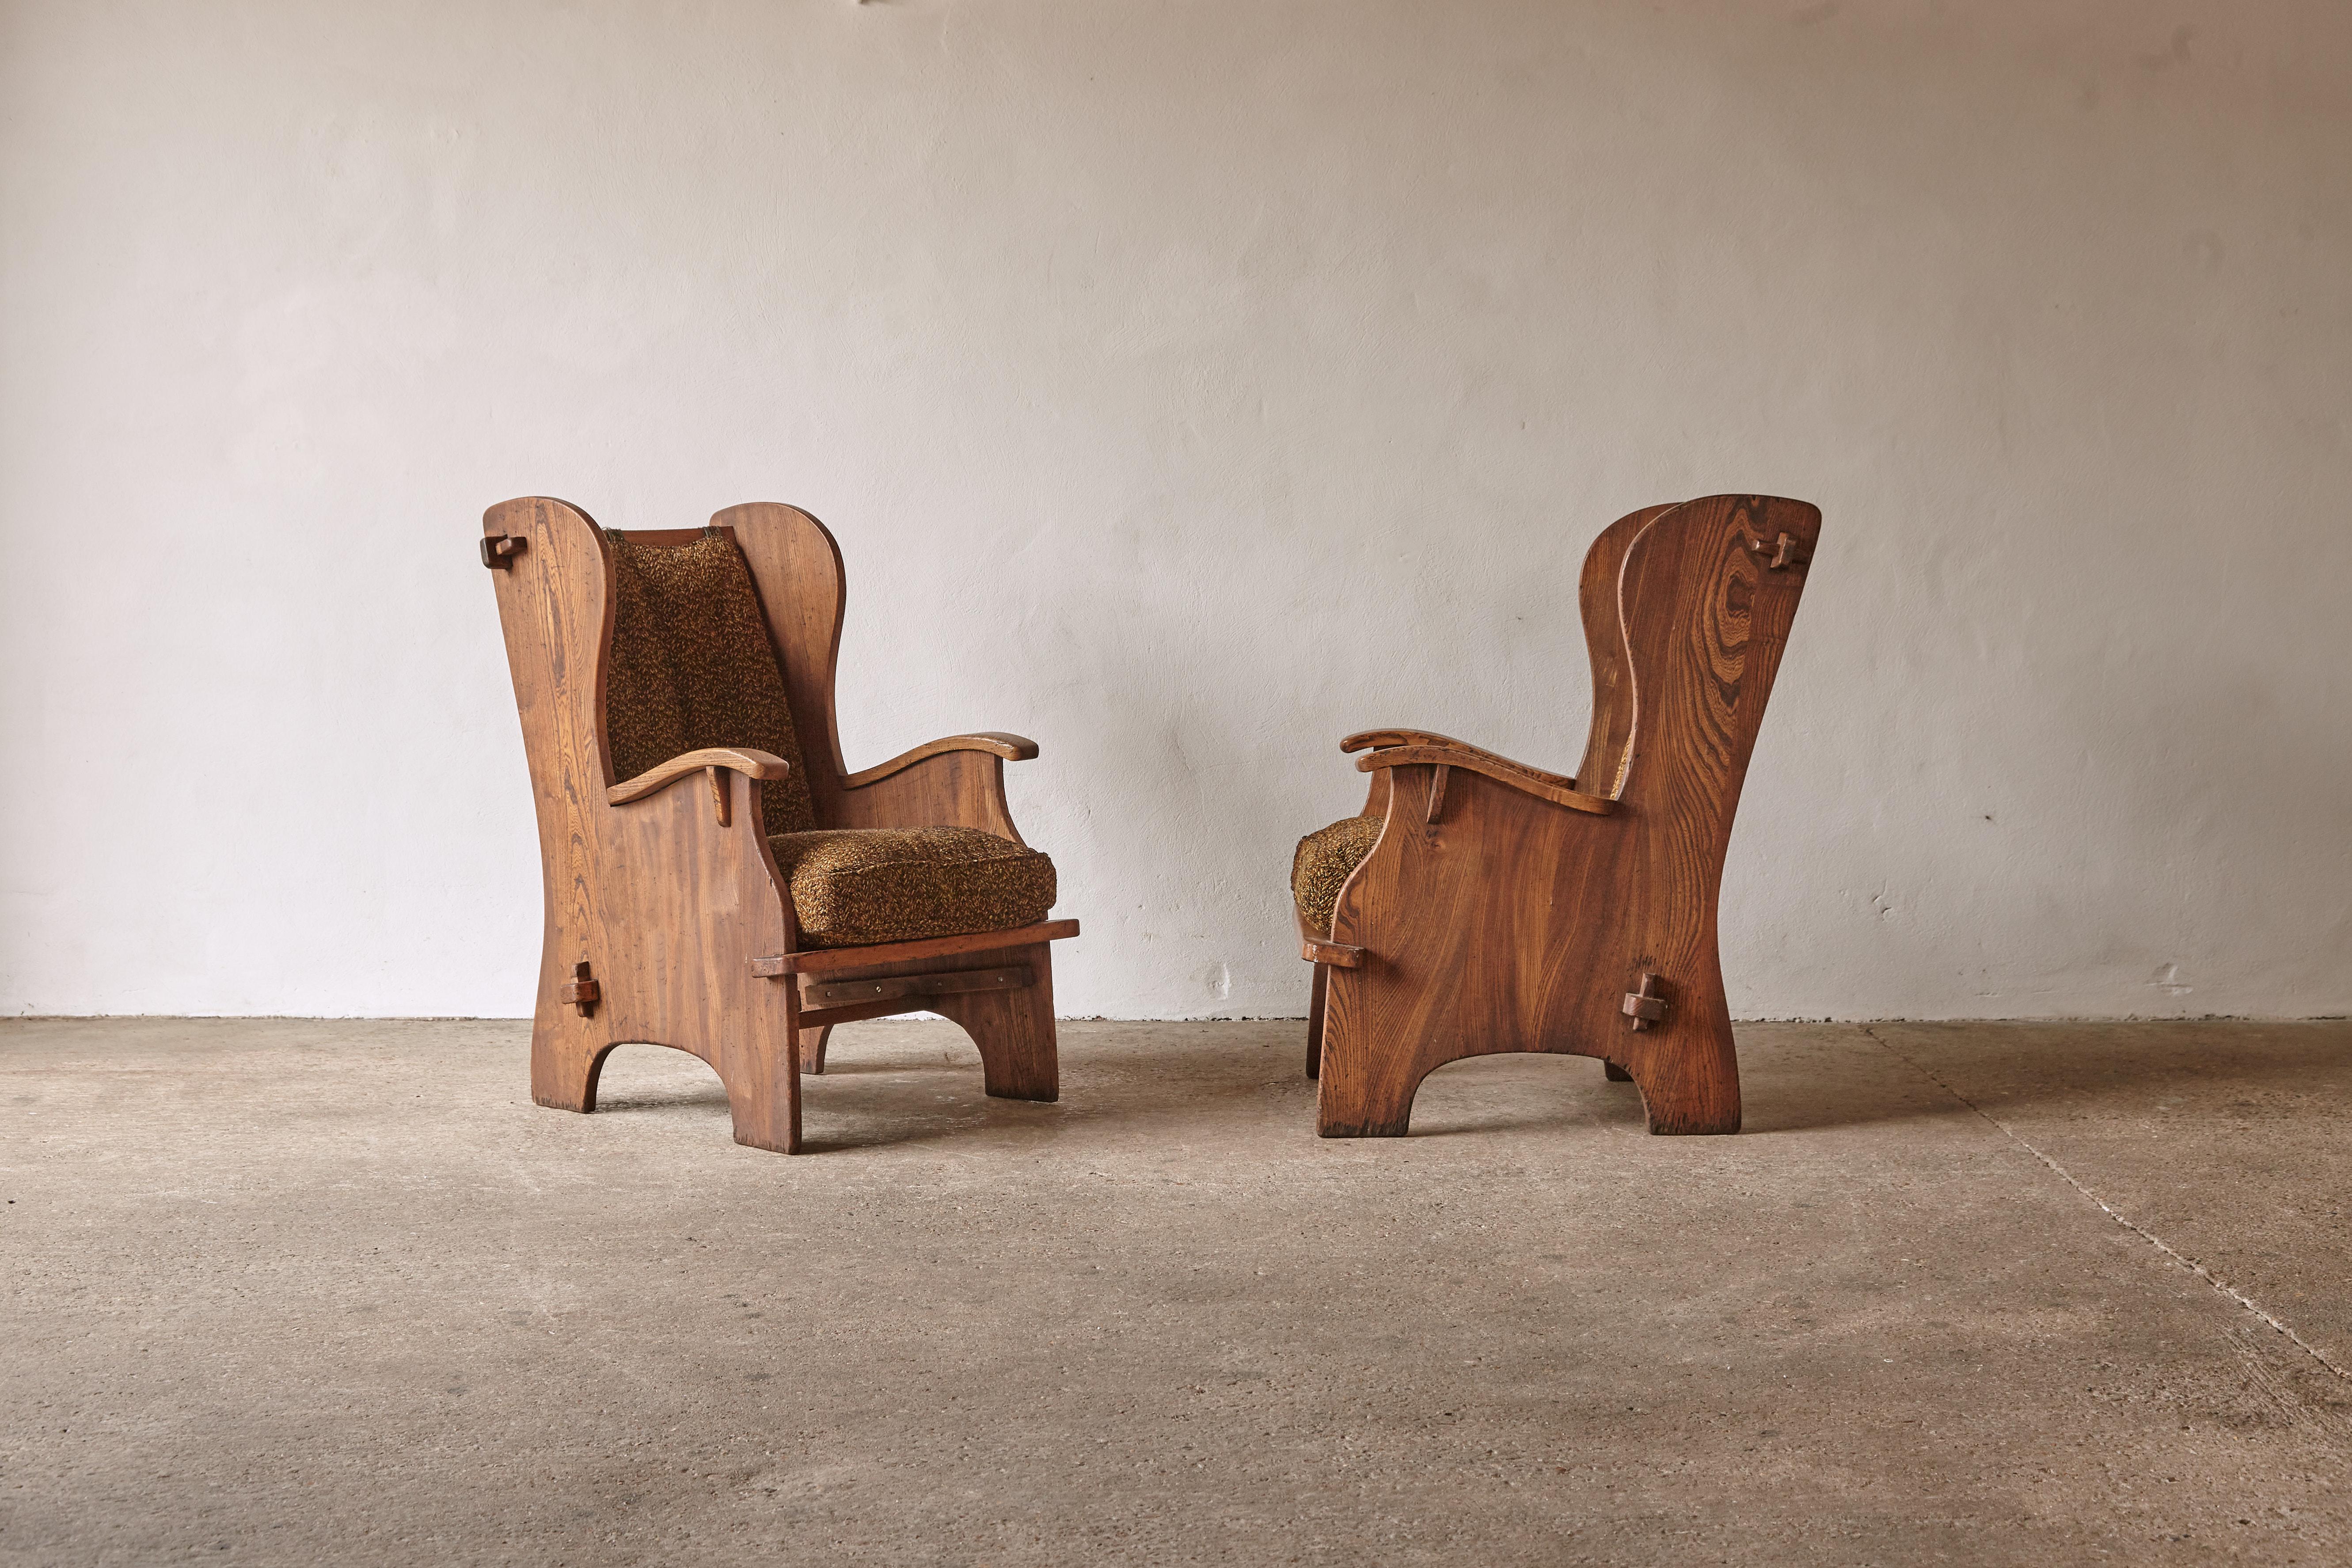 A super pair of English armchairs from the 1930s reminicent of Axel Einar Hjorth's Lovo chair. The chairs are sold in original condition with a wonderful patina to the wood. They would benefit from new fabric as there are some small stains and